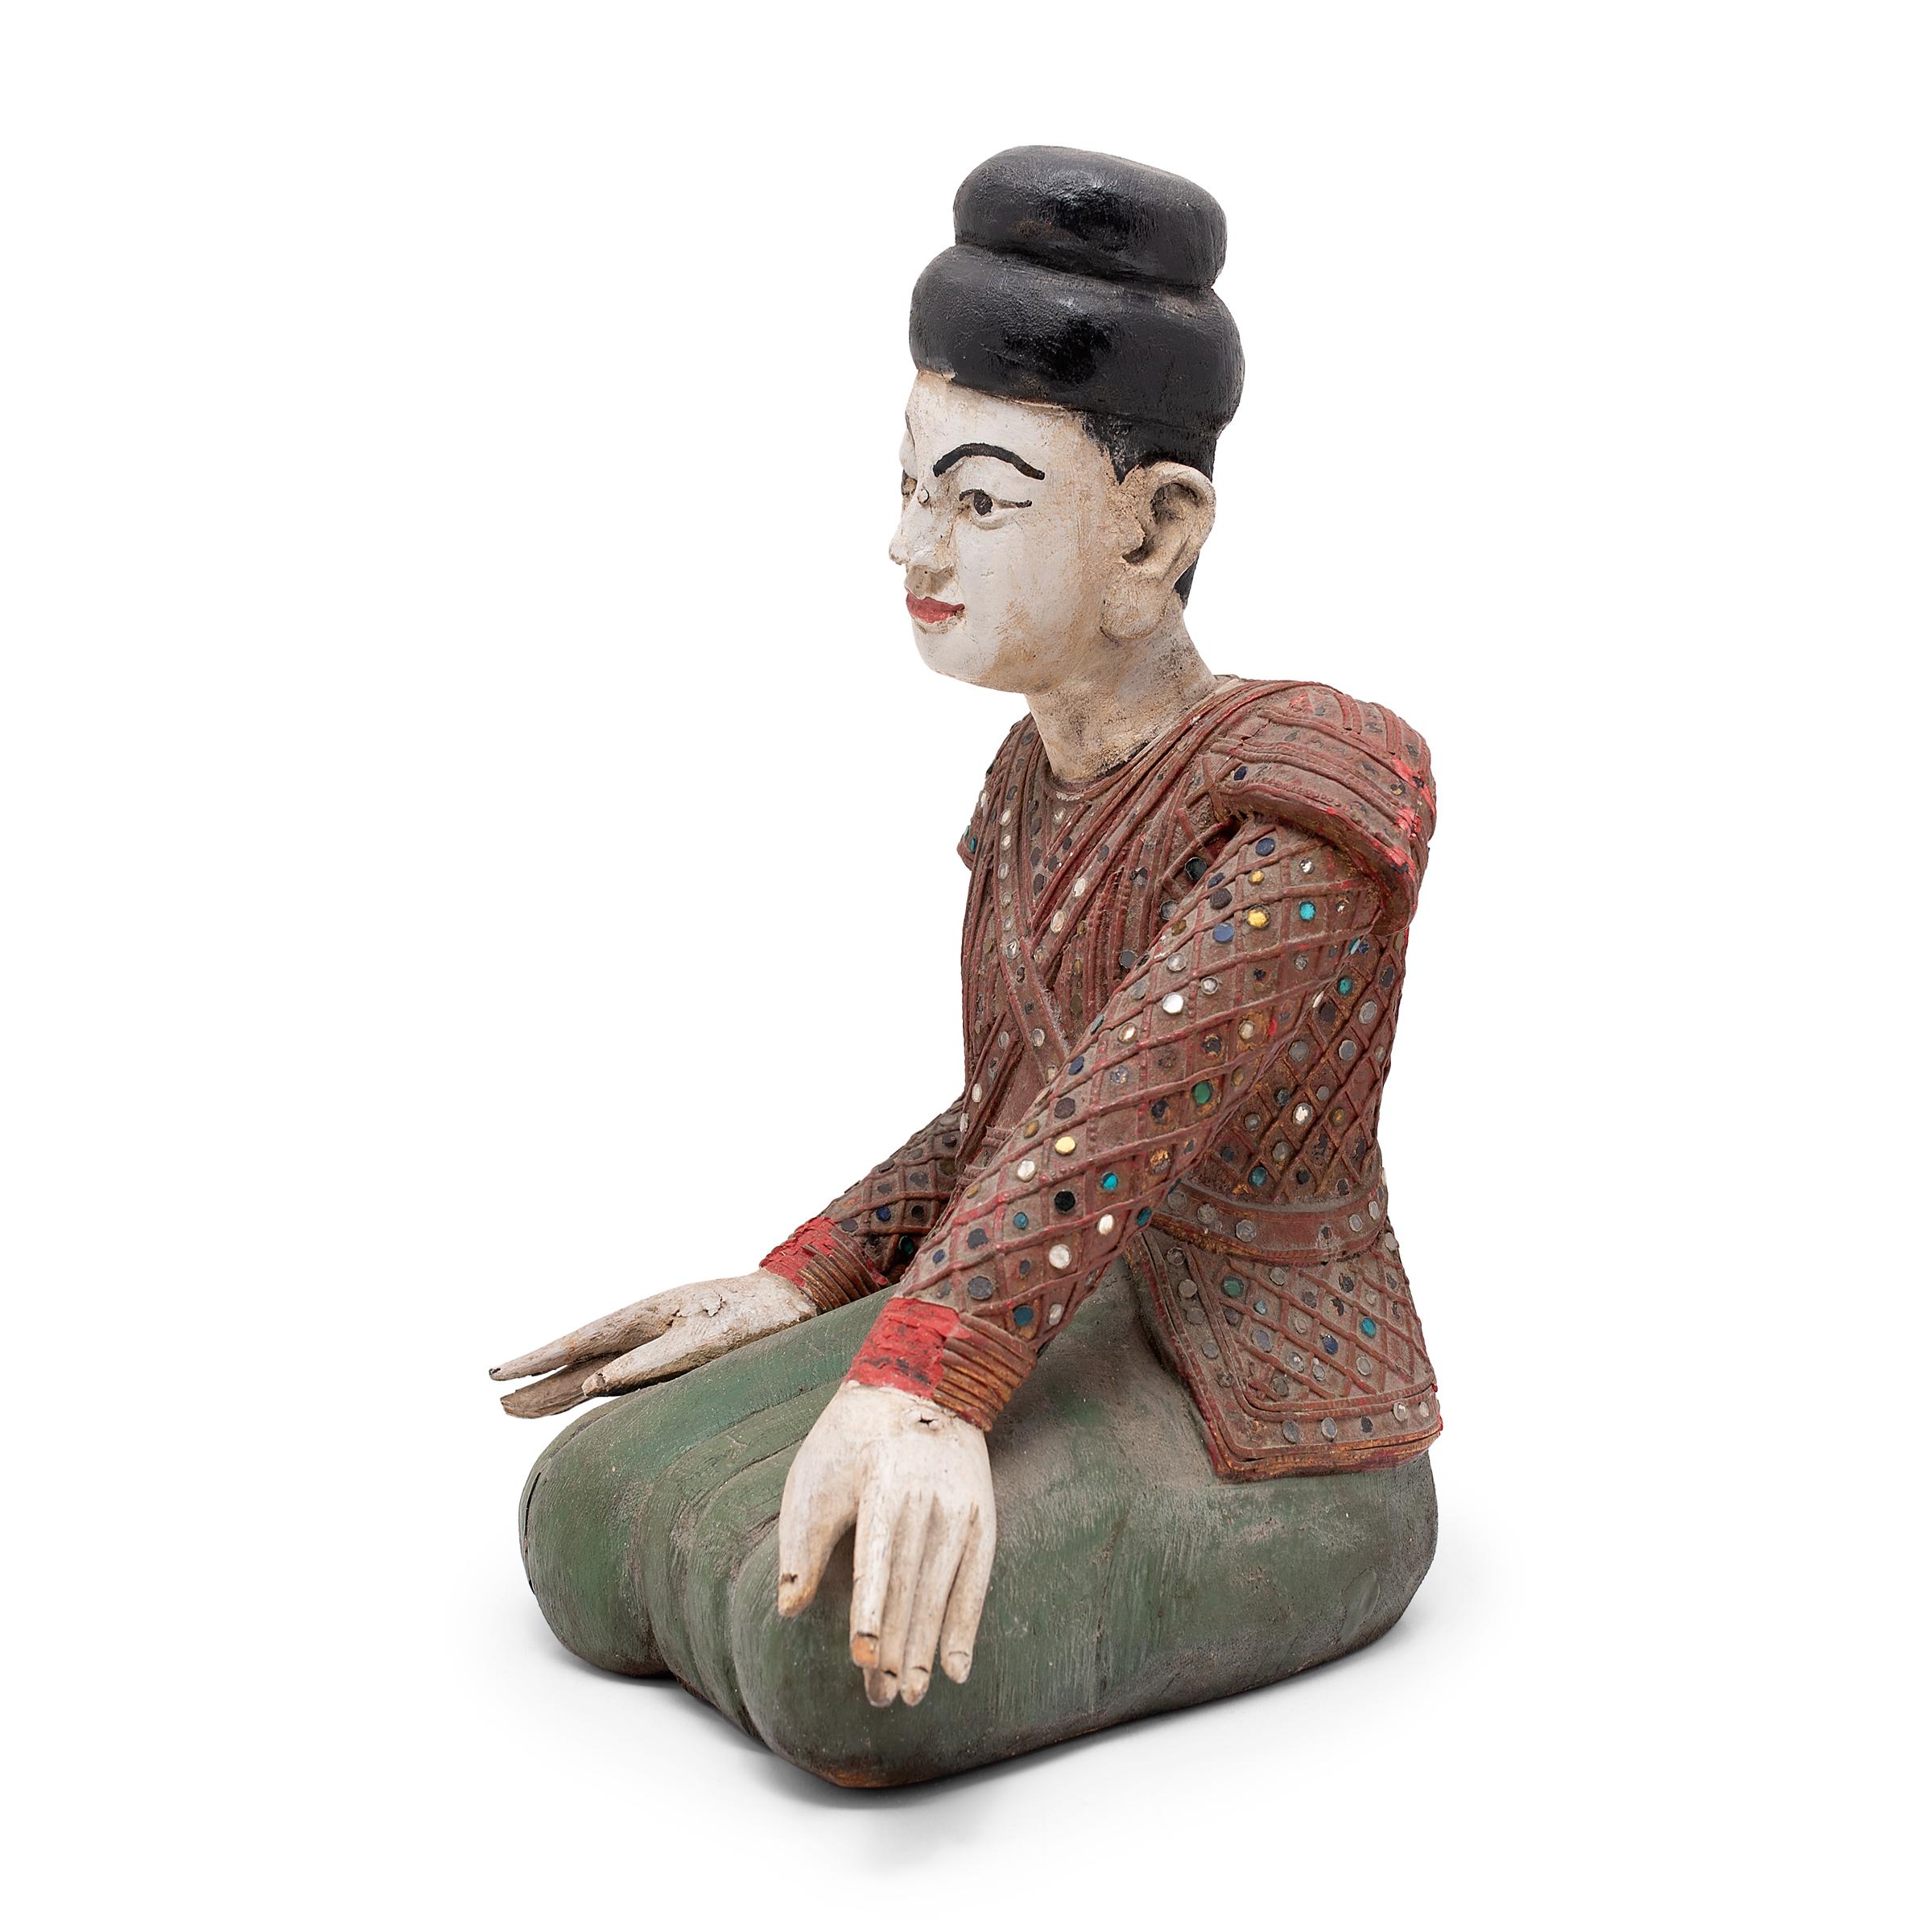 This seated figure of a Thai dancer dates to the early 20th century and is a fantastic example of Southeast Asian statuary. Comprised of polychromed wood with lacquer and mixed-media elements, the figure is visually similar to three-dimensional